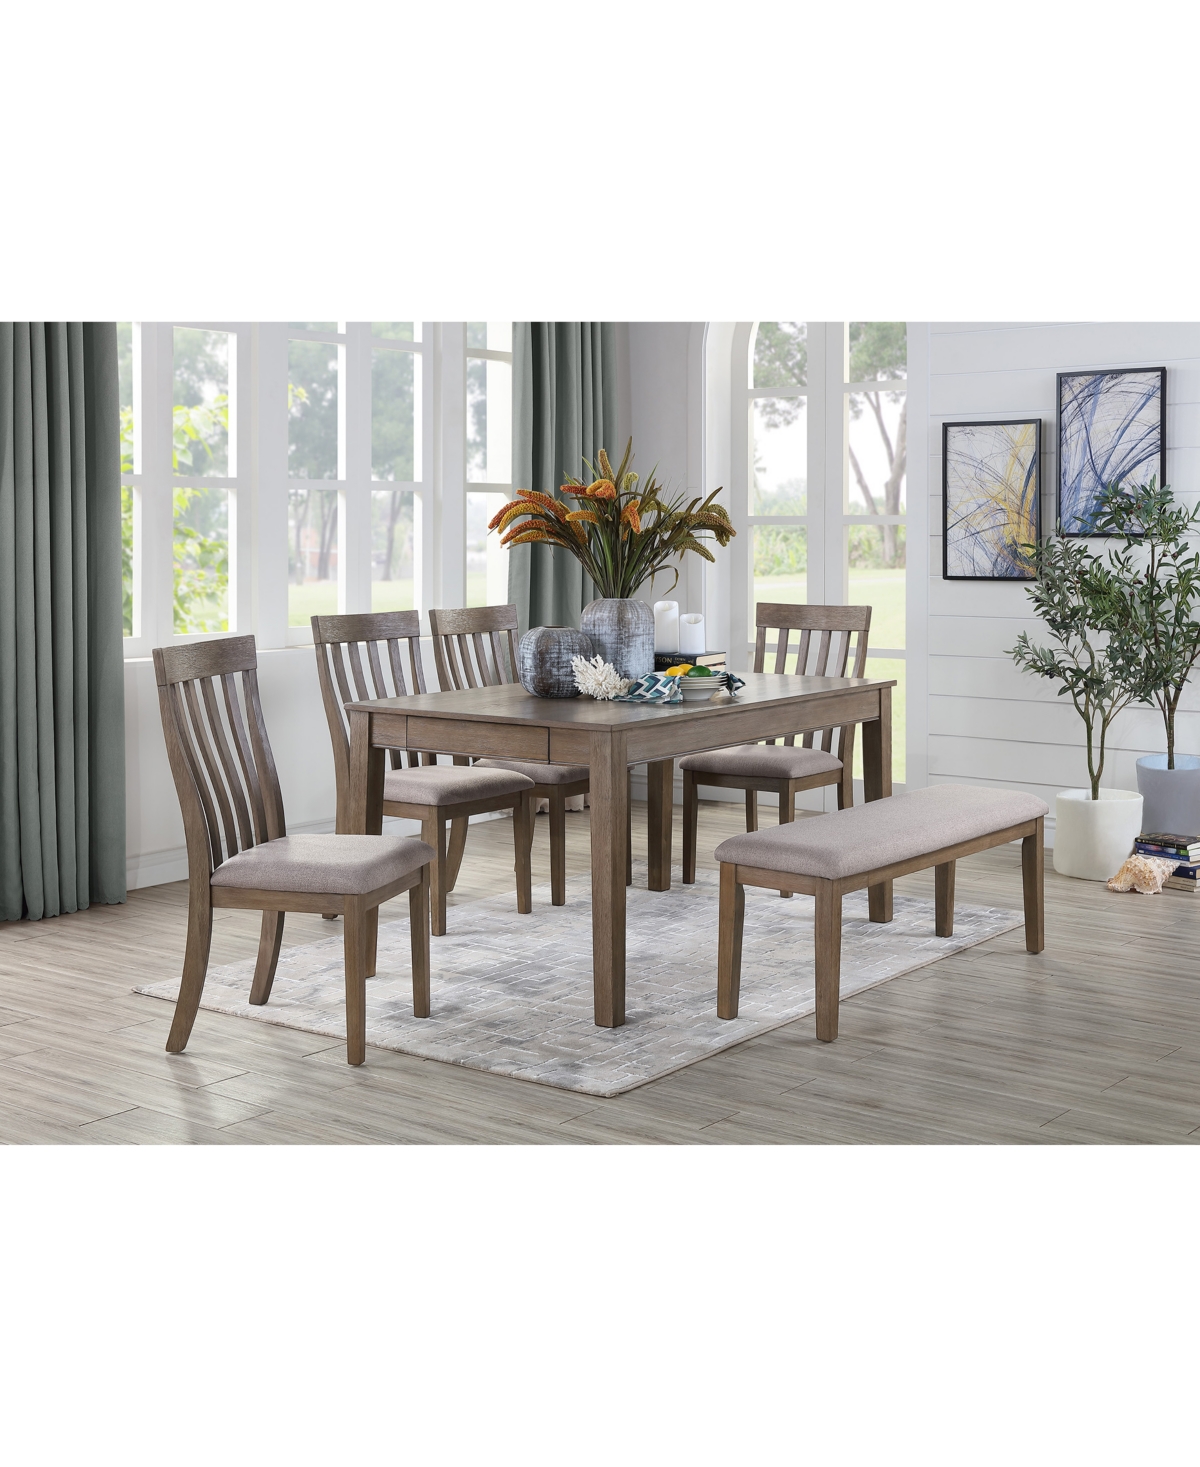 Furniture Forte 6pc Dining Set (rectangular Dining Table, 4 Side Chairs & Bench) In Brown